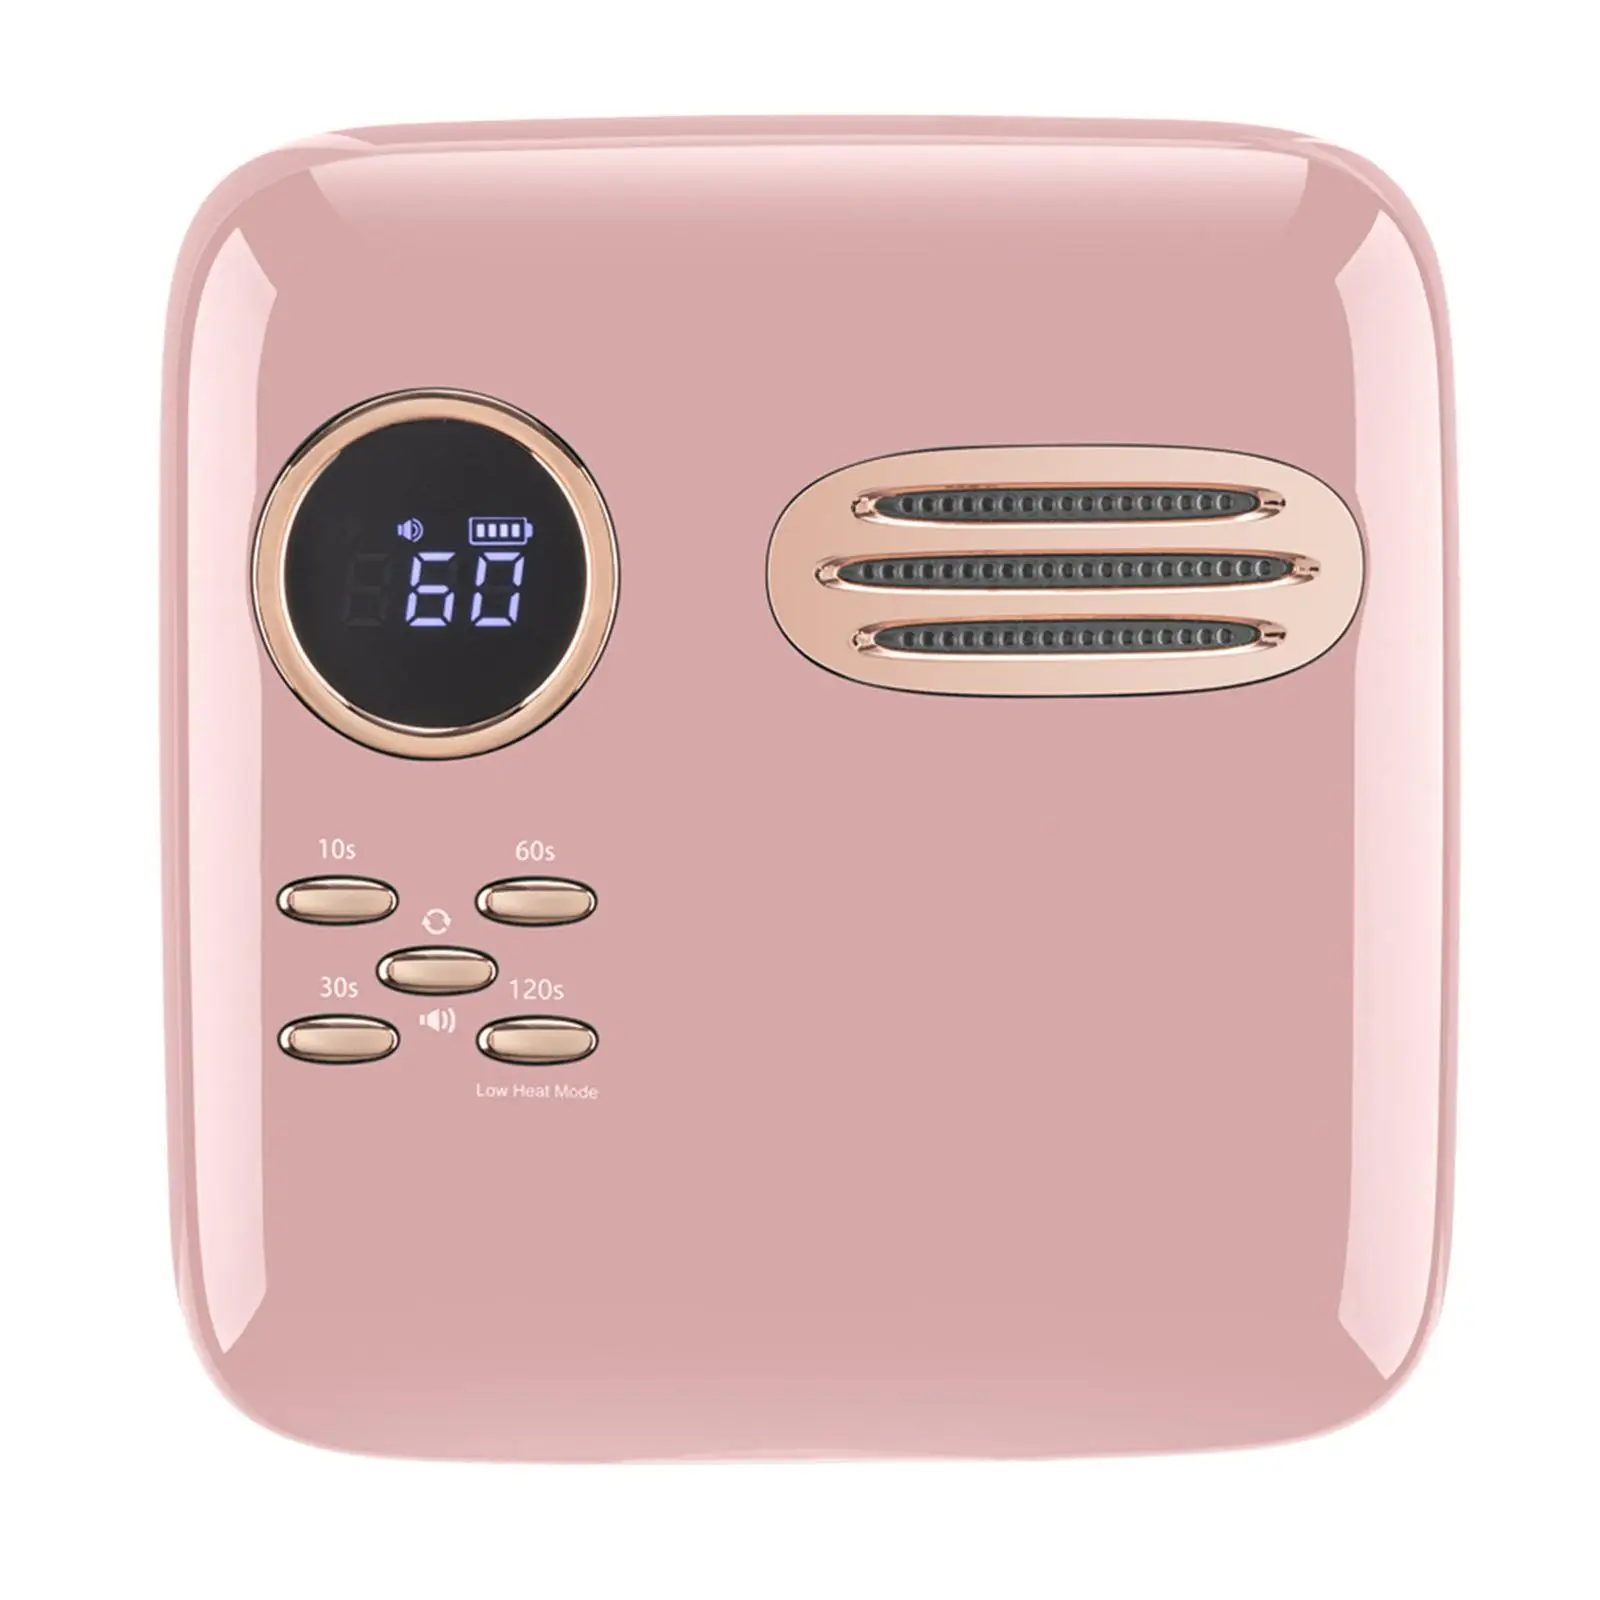 Nail Dryer Lamp LCD Display with Detachable Base for Fingernails Toenails